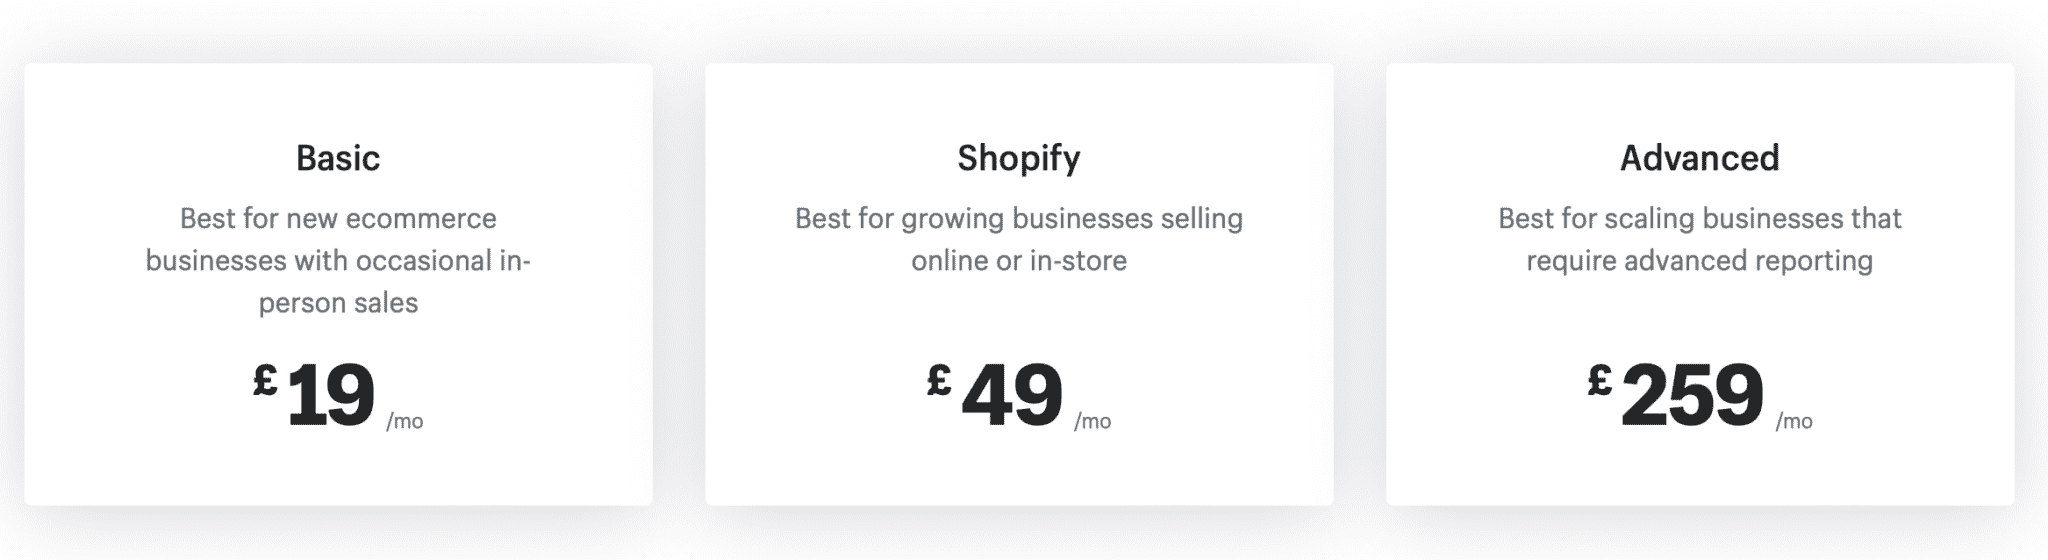 Shopify pricing tiers